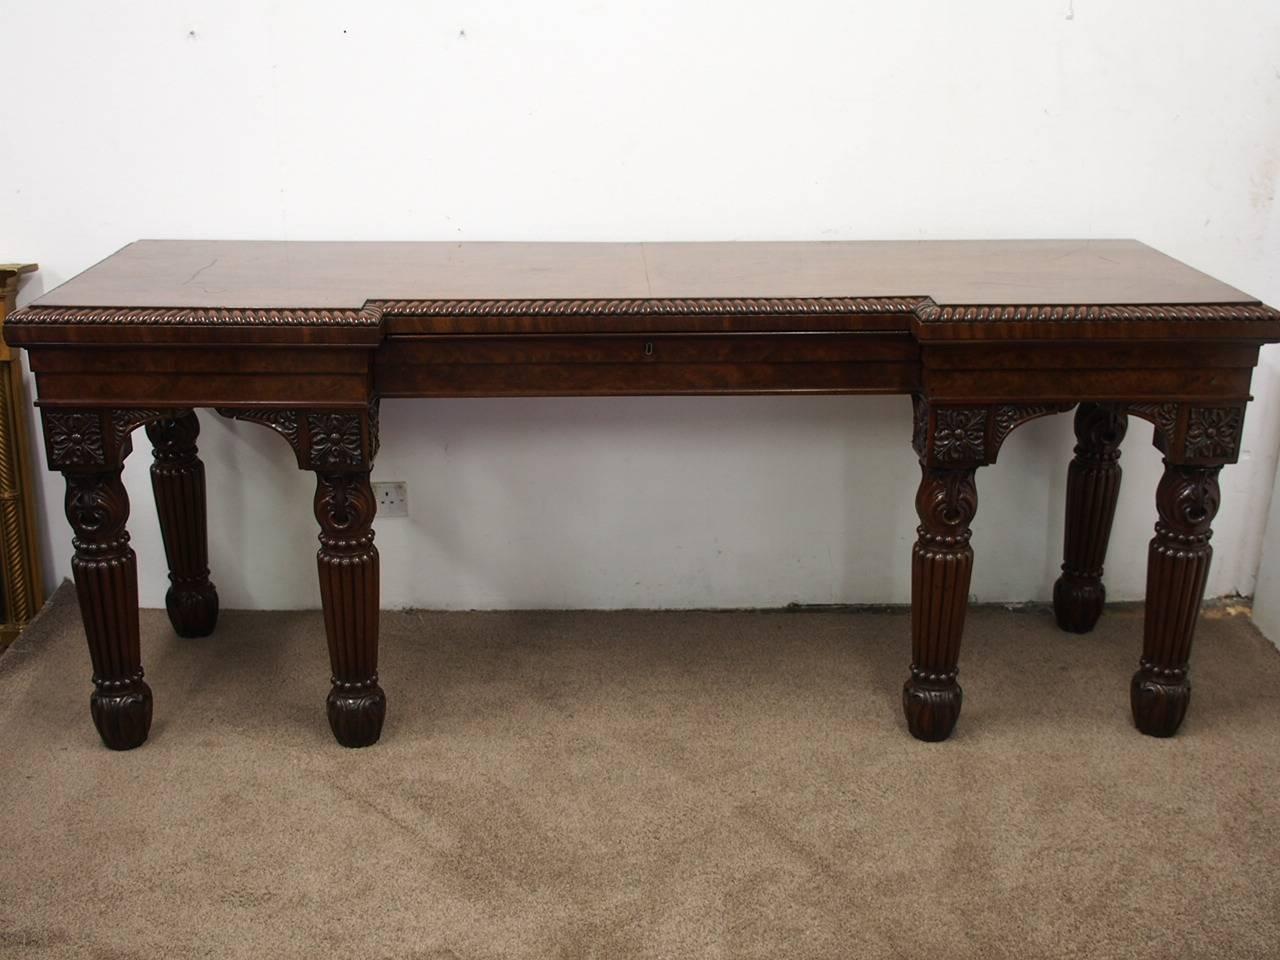 Regency Mahogany Breakfront Hall Table or Serving Table, circa 1820 For Sale 1